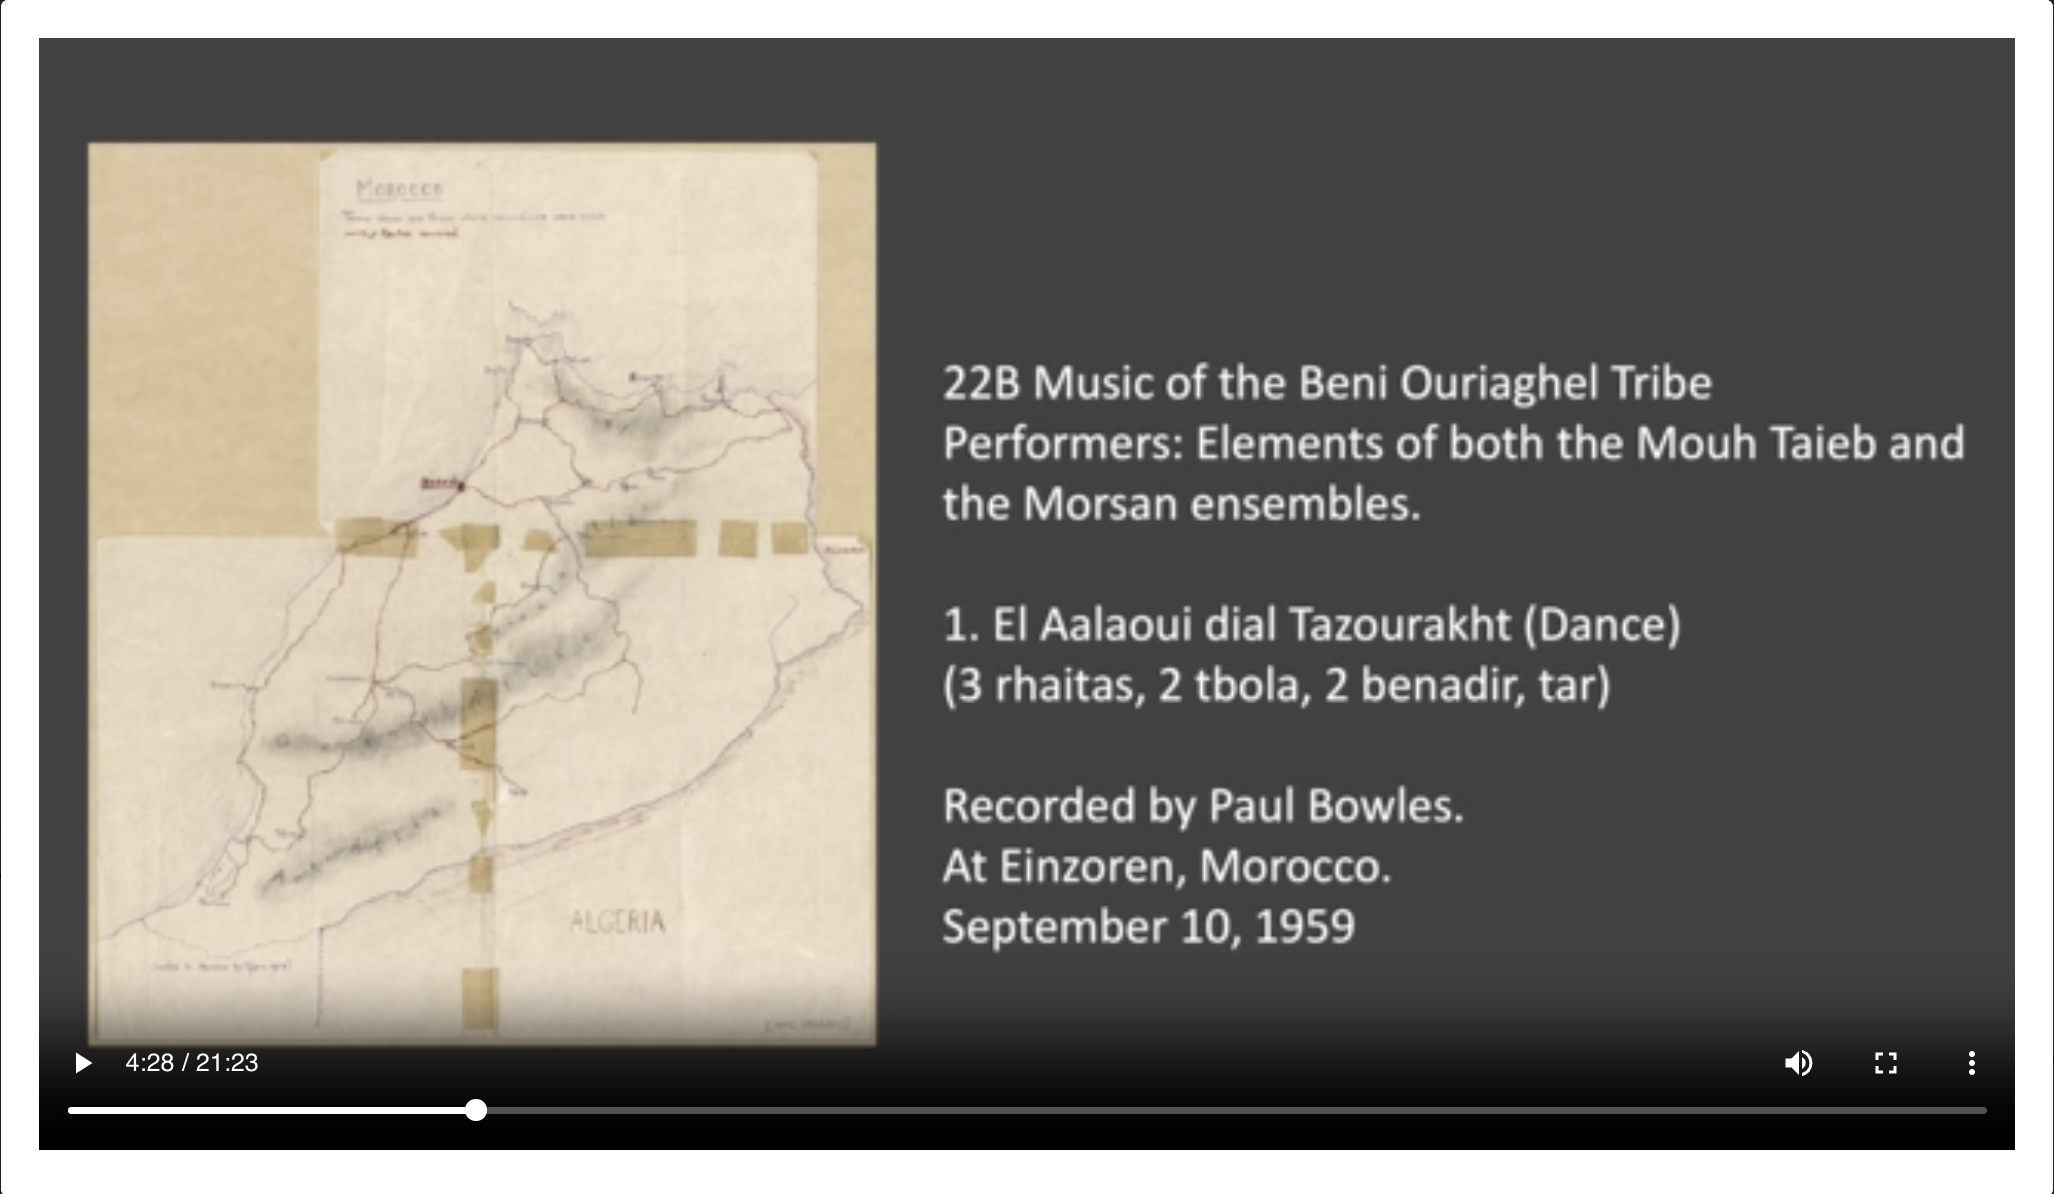 <p>22B 1. El Aalaoui dial Tazourakht (Dance) (3 rhaitas, 2 tbola, 1 bendir, tar) Music of the Beni Ouriaghel Tribe Performers: Elements of both the Mouh Taieb and the Morsan ensembles. Recorded by Paul Bowles at Einzoren, Morocco. September 10, 1959</p>